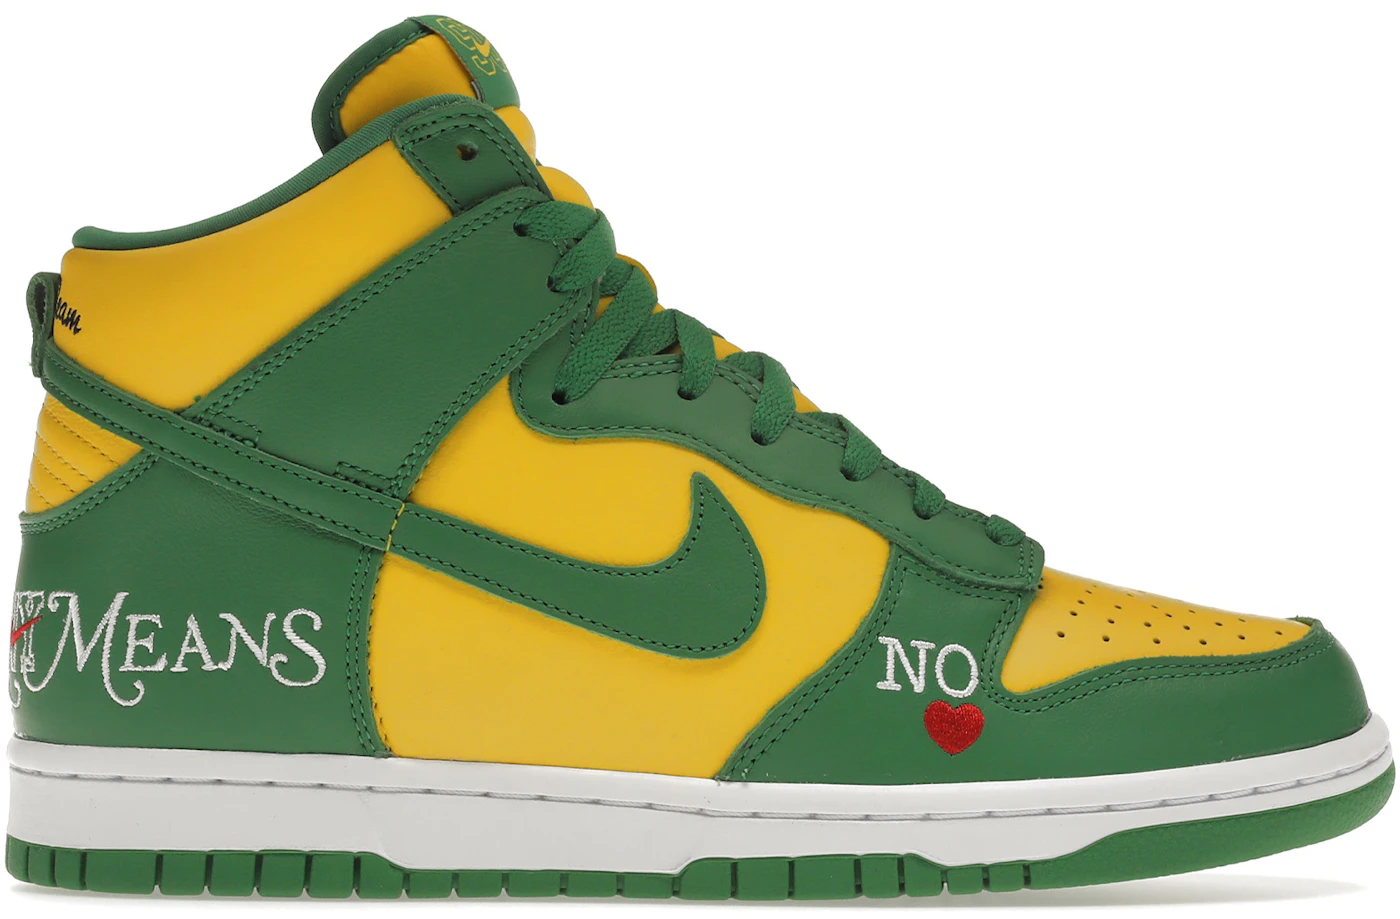 https://images.stockx.com/images/Nike-SB-Dunk-High-Supreme-By-Any-Means-Brazil-Product.jpg?fit=fill&bg=FFFFFF&w=700&h=500&fm=webp&auto=compress&q=90&dpr=2&trim=color&updated_at=1646753643